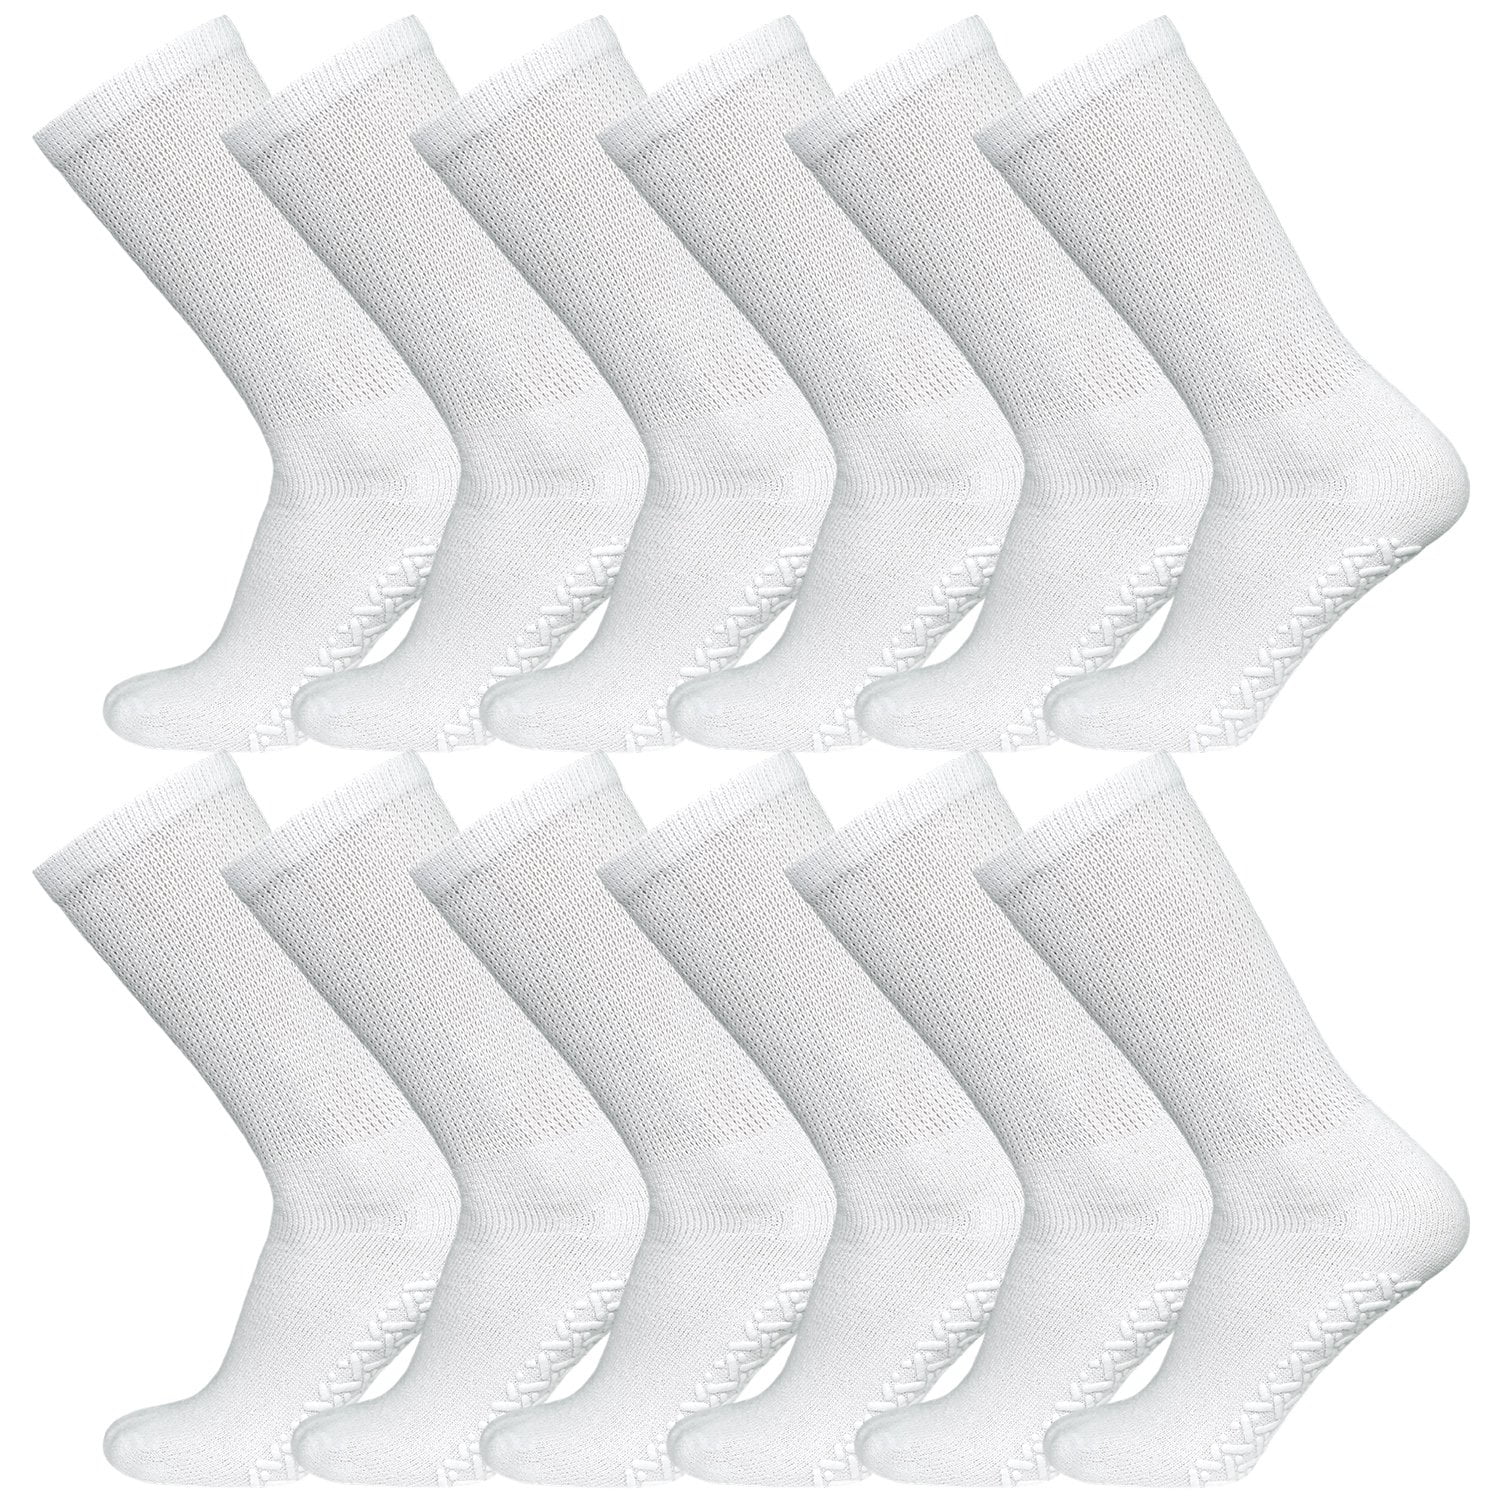 12 Pairs of Non-Skid Diabetic Cotton Crew Socks with Non Binding Top ...